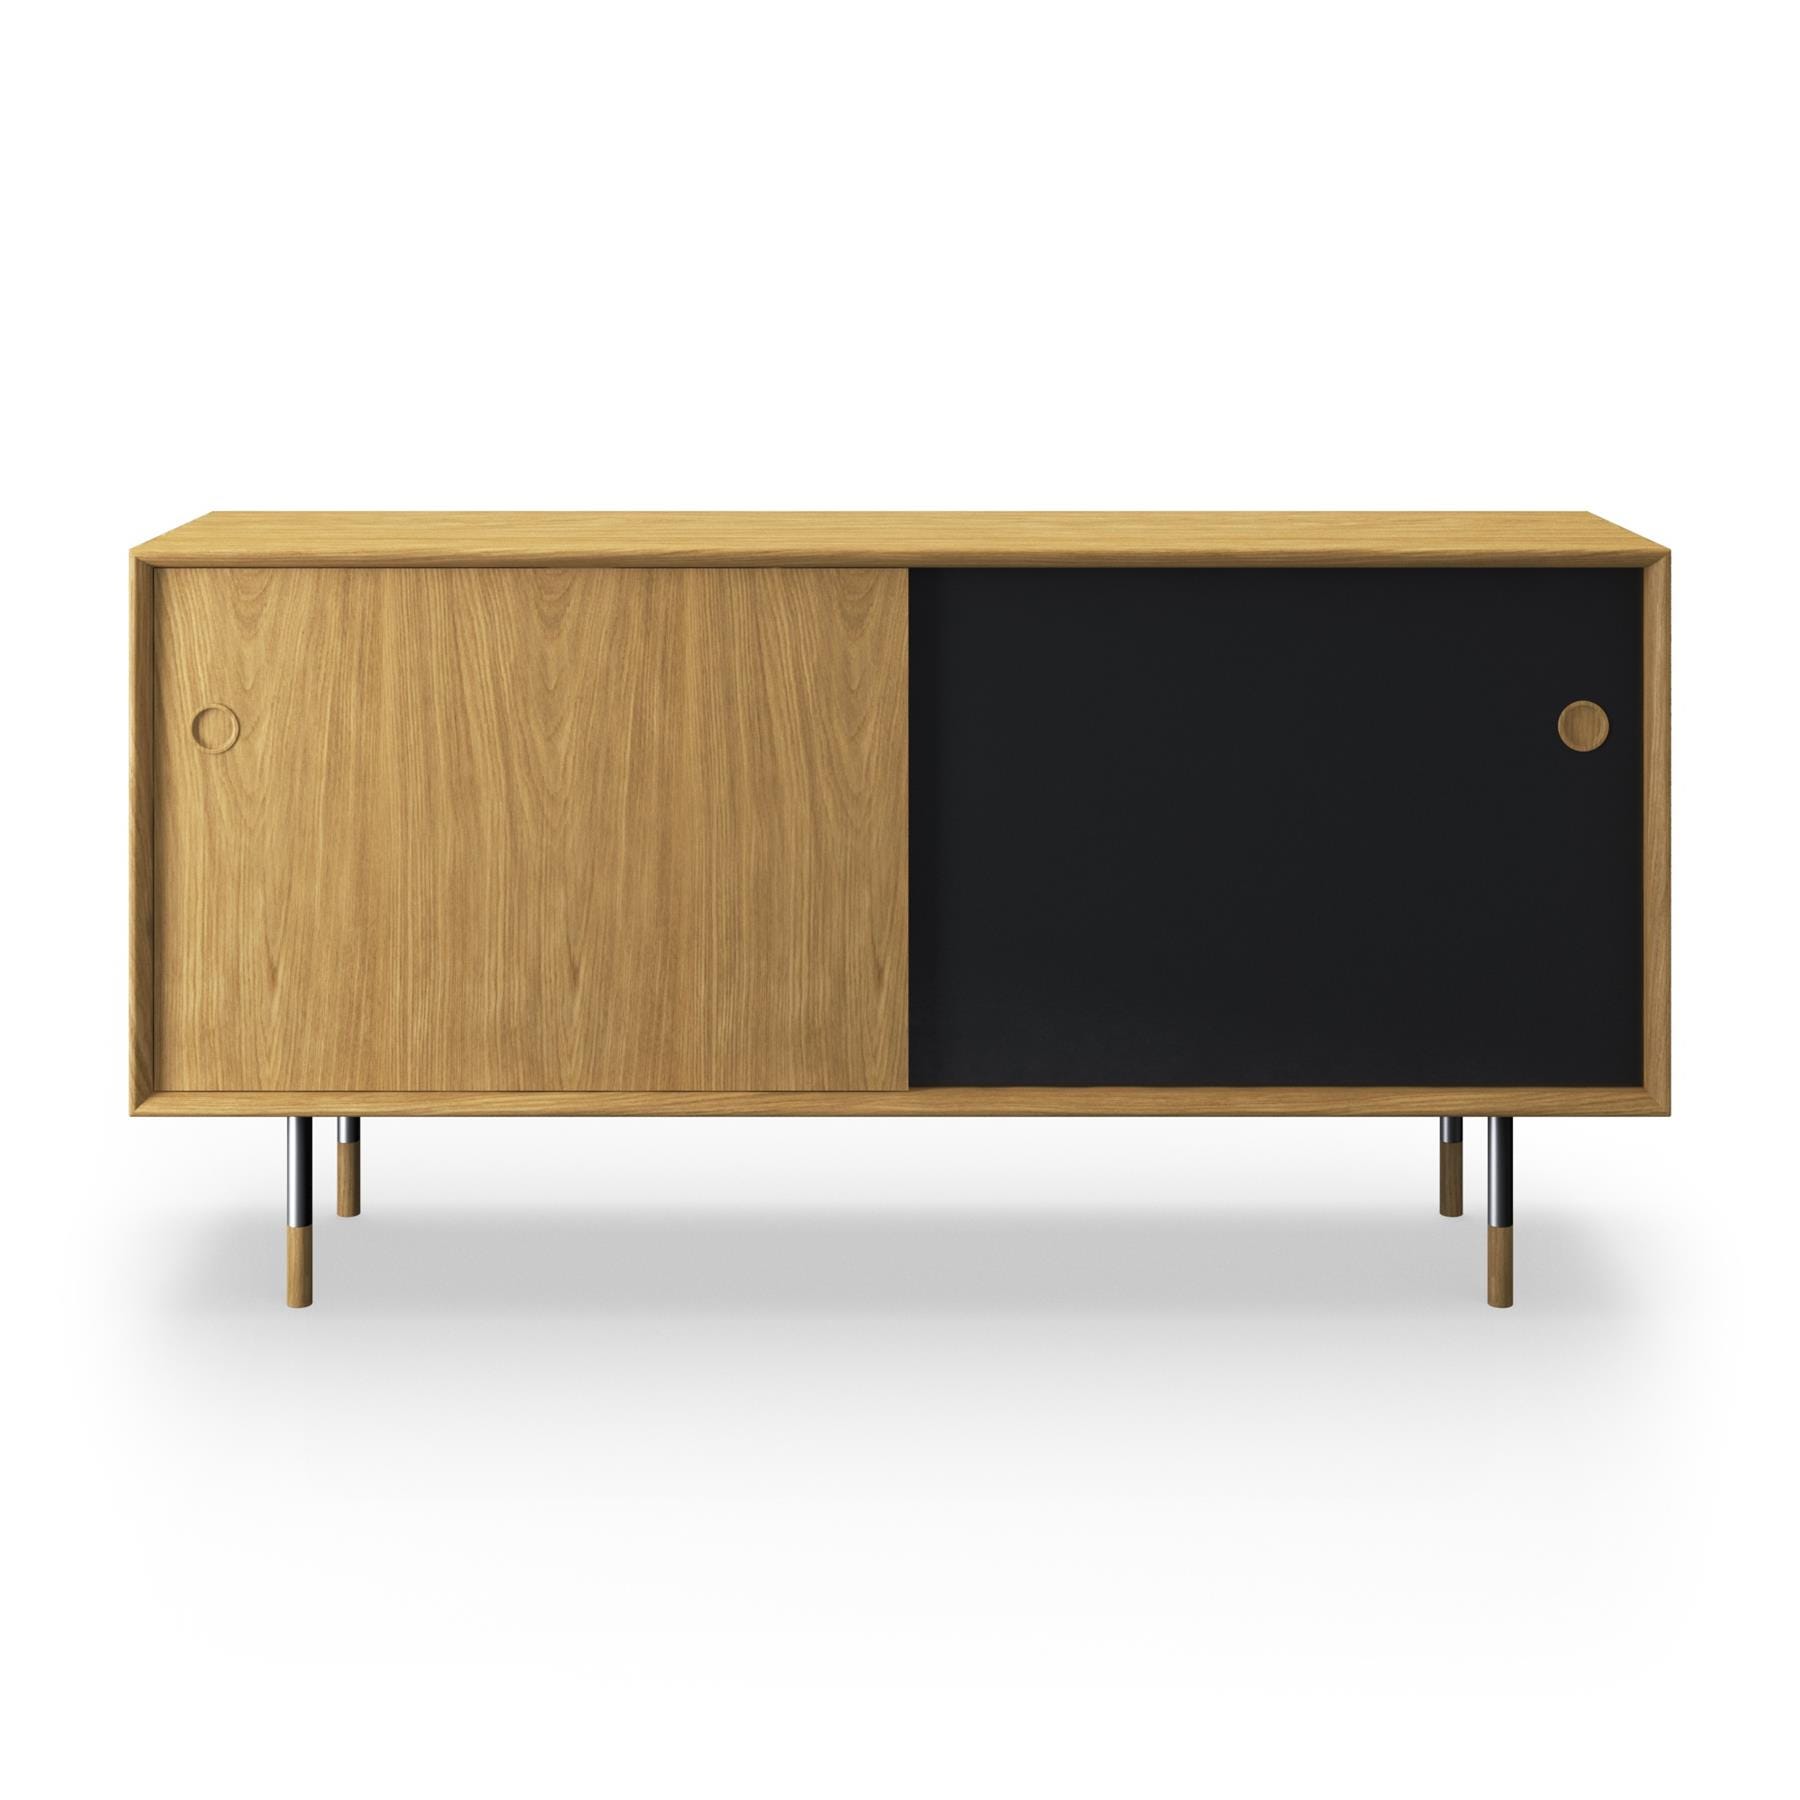 Sibast No 11 Sideboard Natural Oiled Oak Black And Natural Front Metal Legs Light Wood Designer Furniture From Holloways Of Ludlow